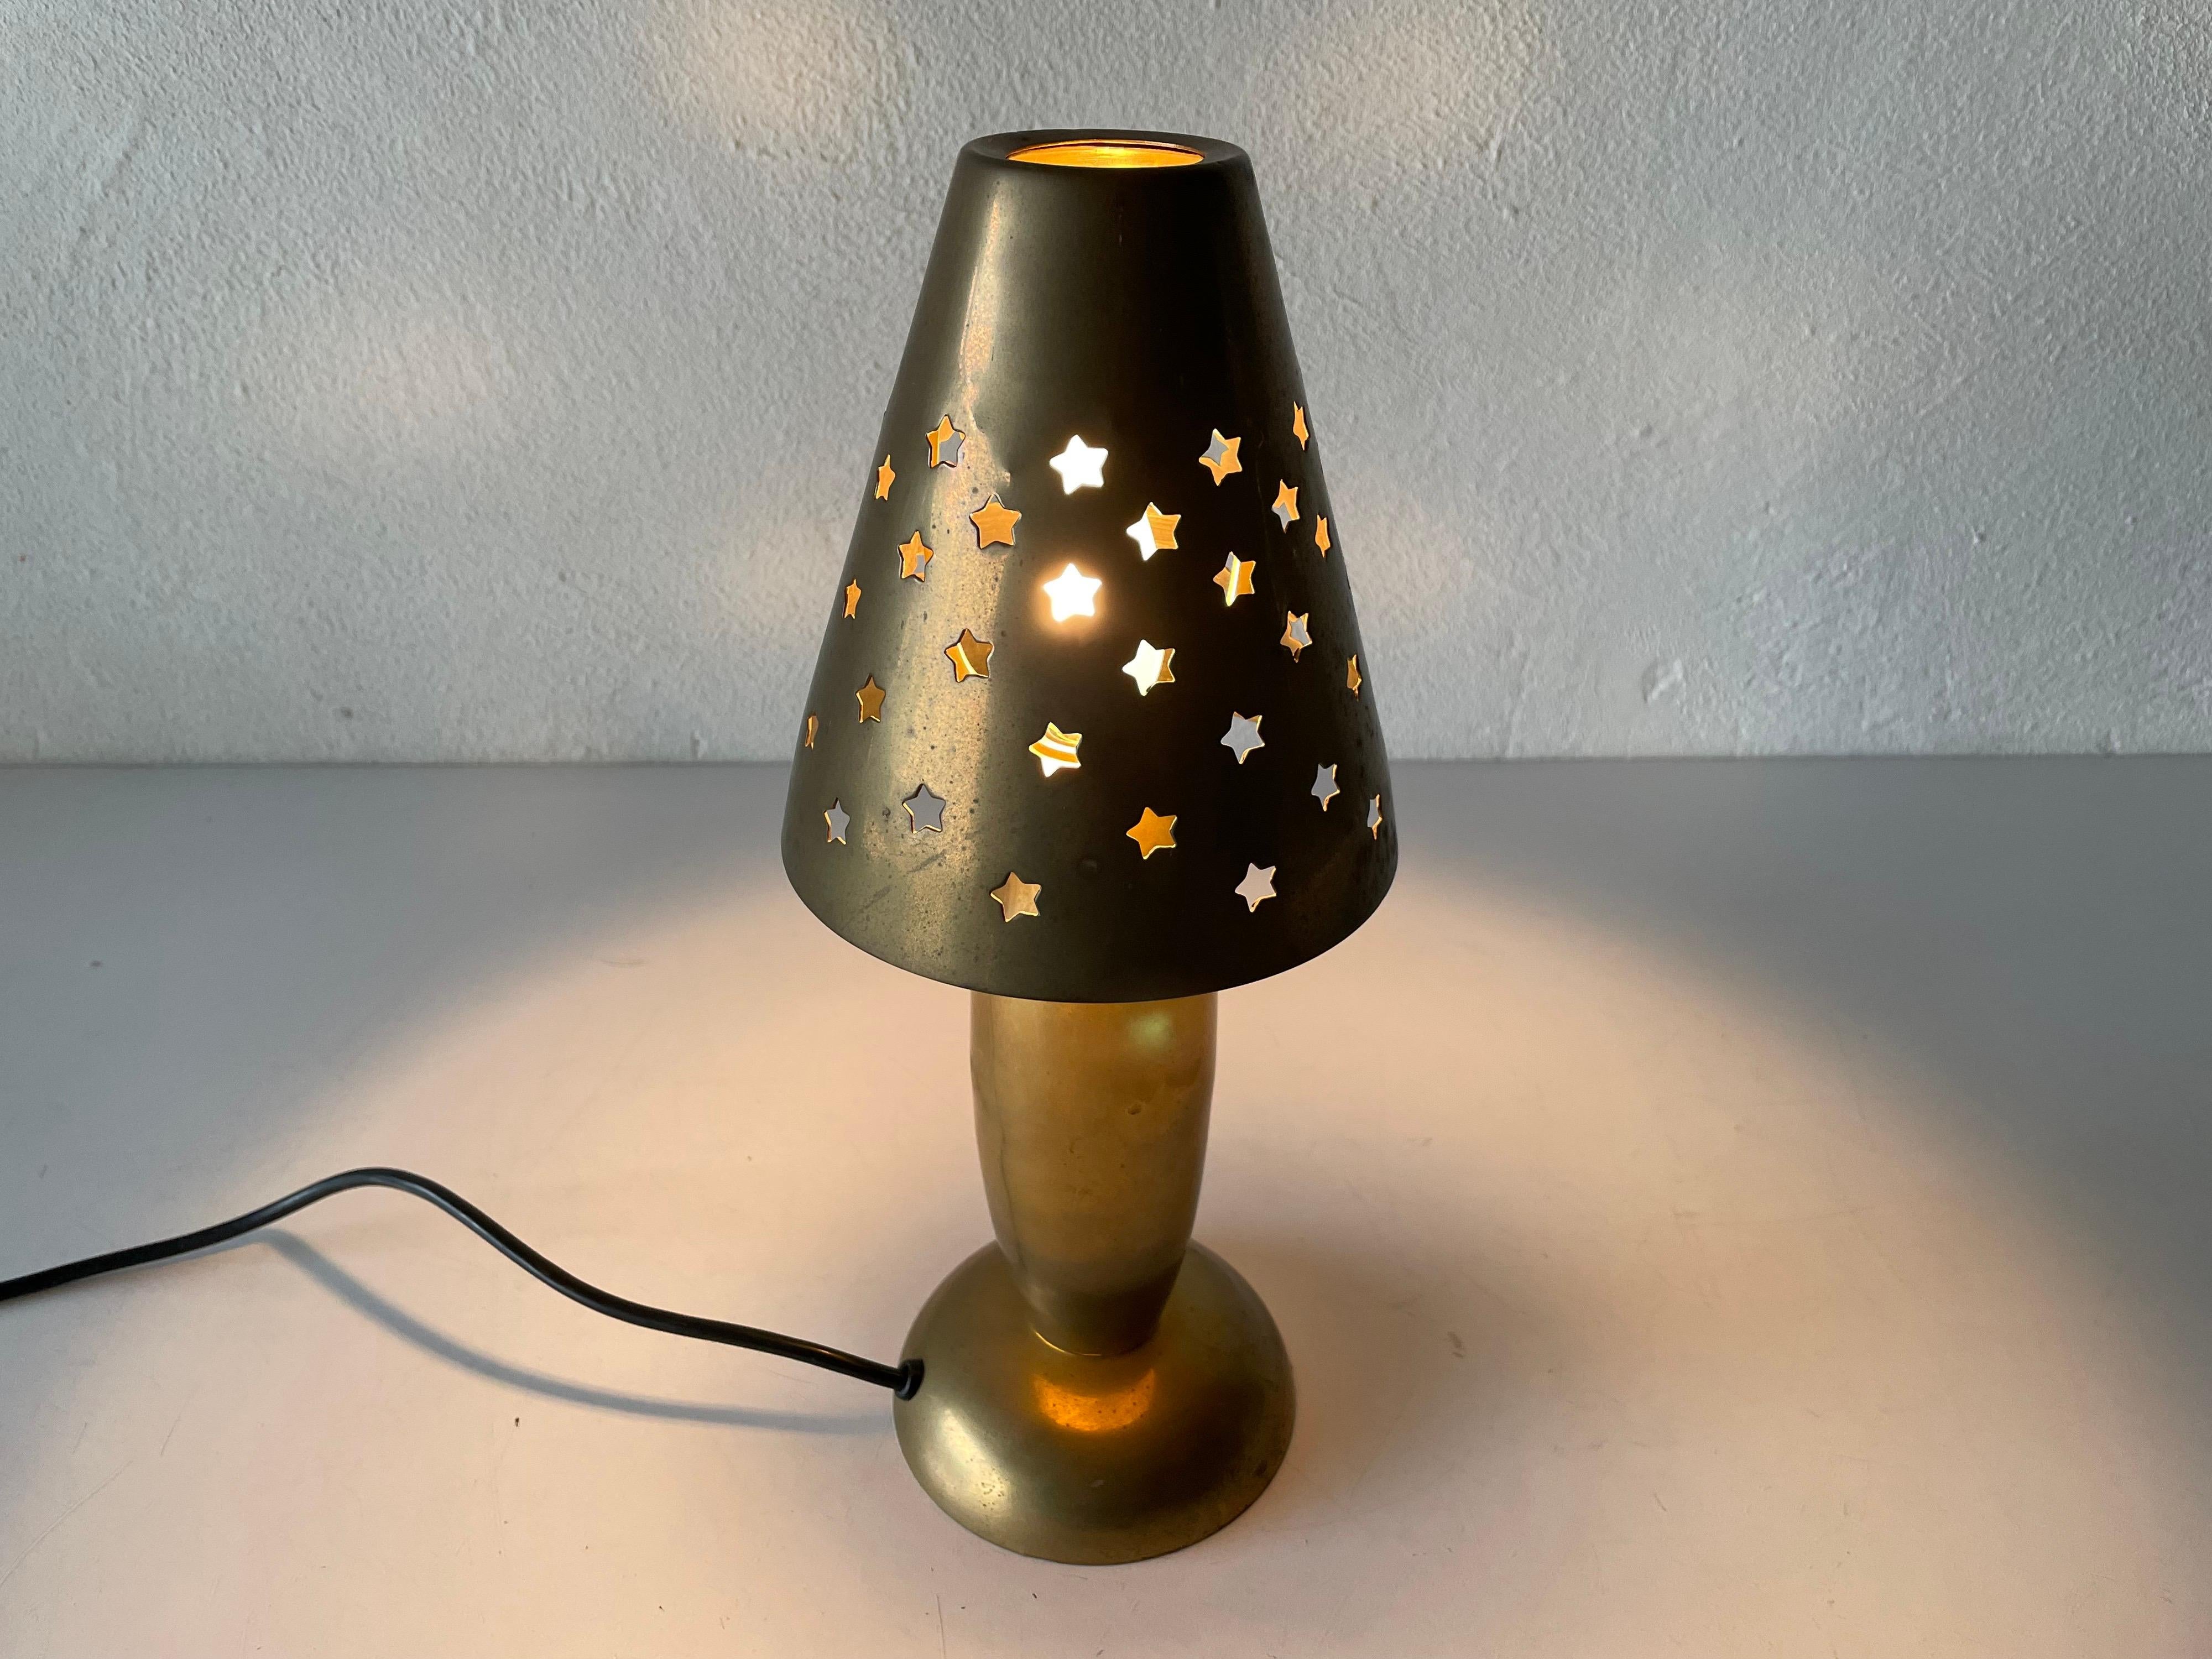 Heavy Full Brass Table Lamp by Gunther Lambert Collection, 1960s, Germany For Sale 4